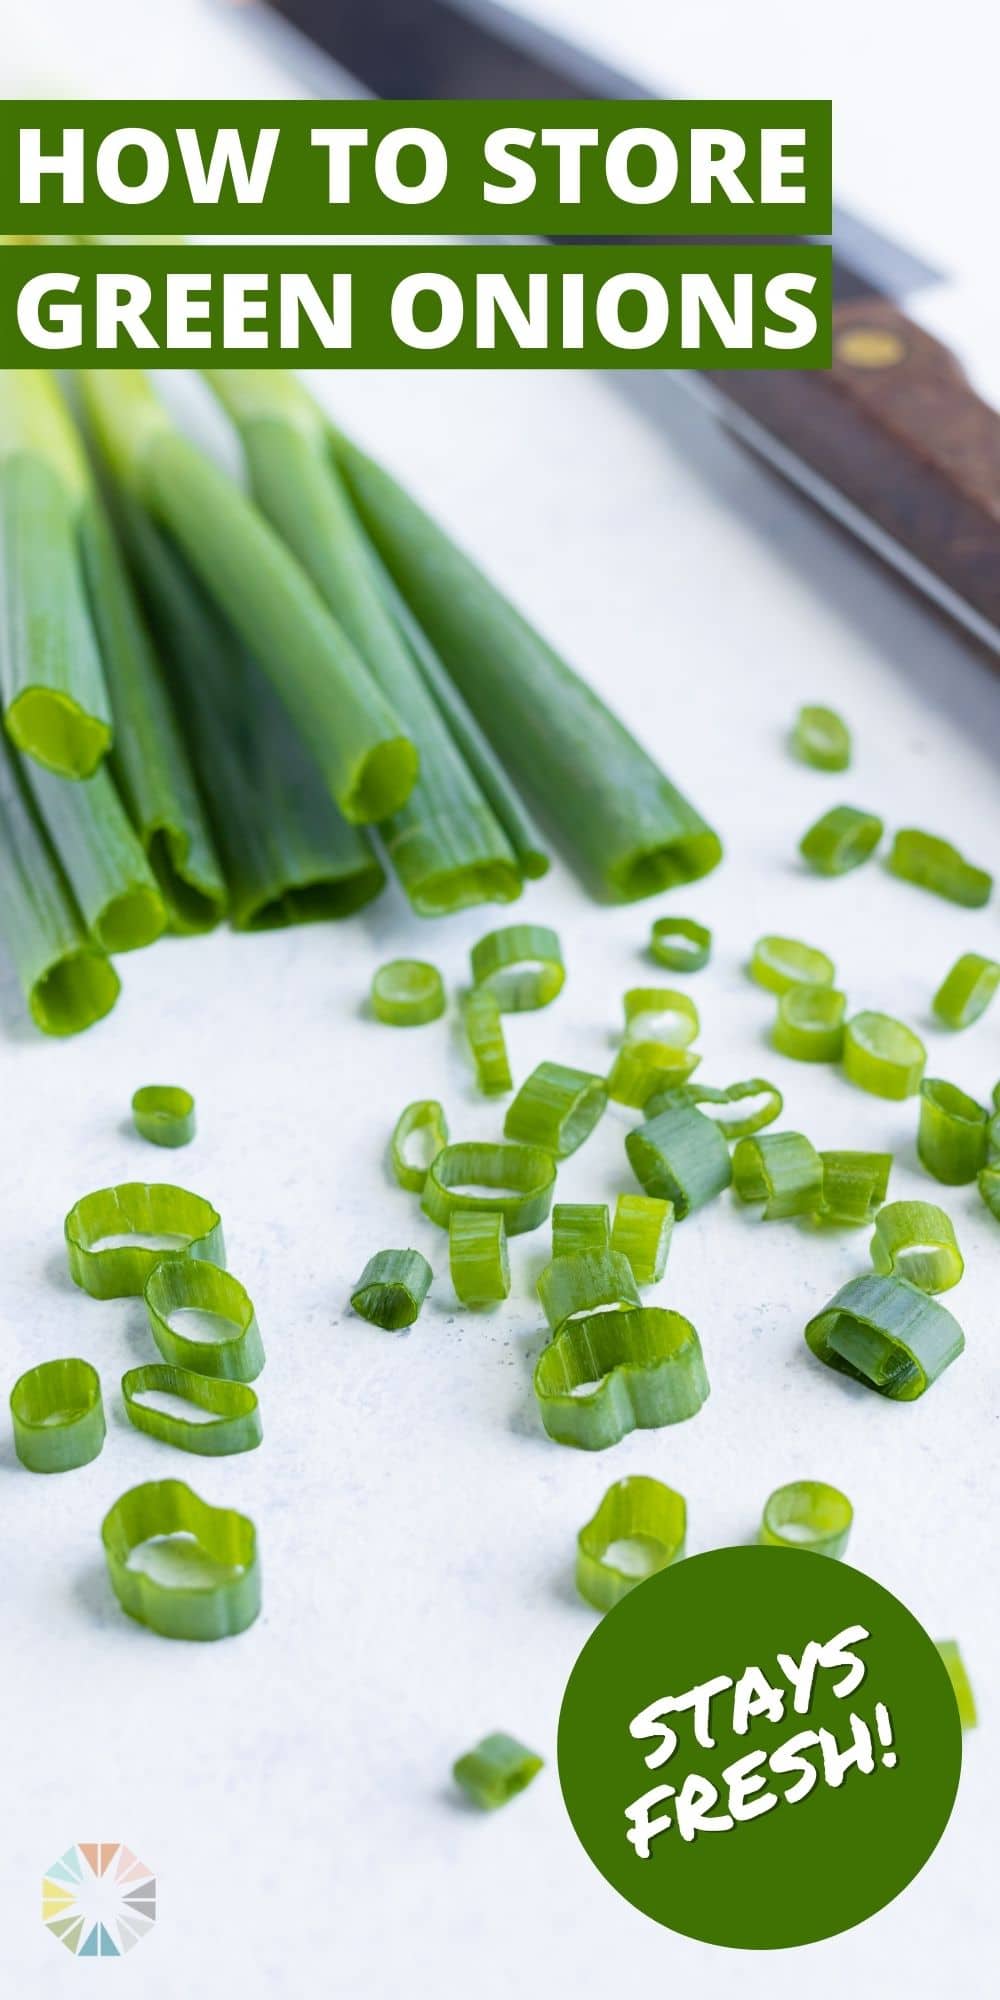 How To Store Green Onions Pinterest 22 1 C 